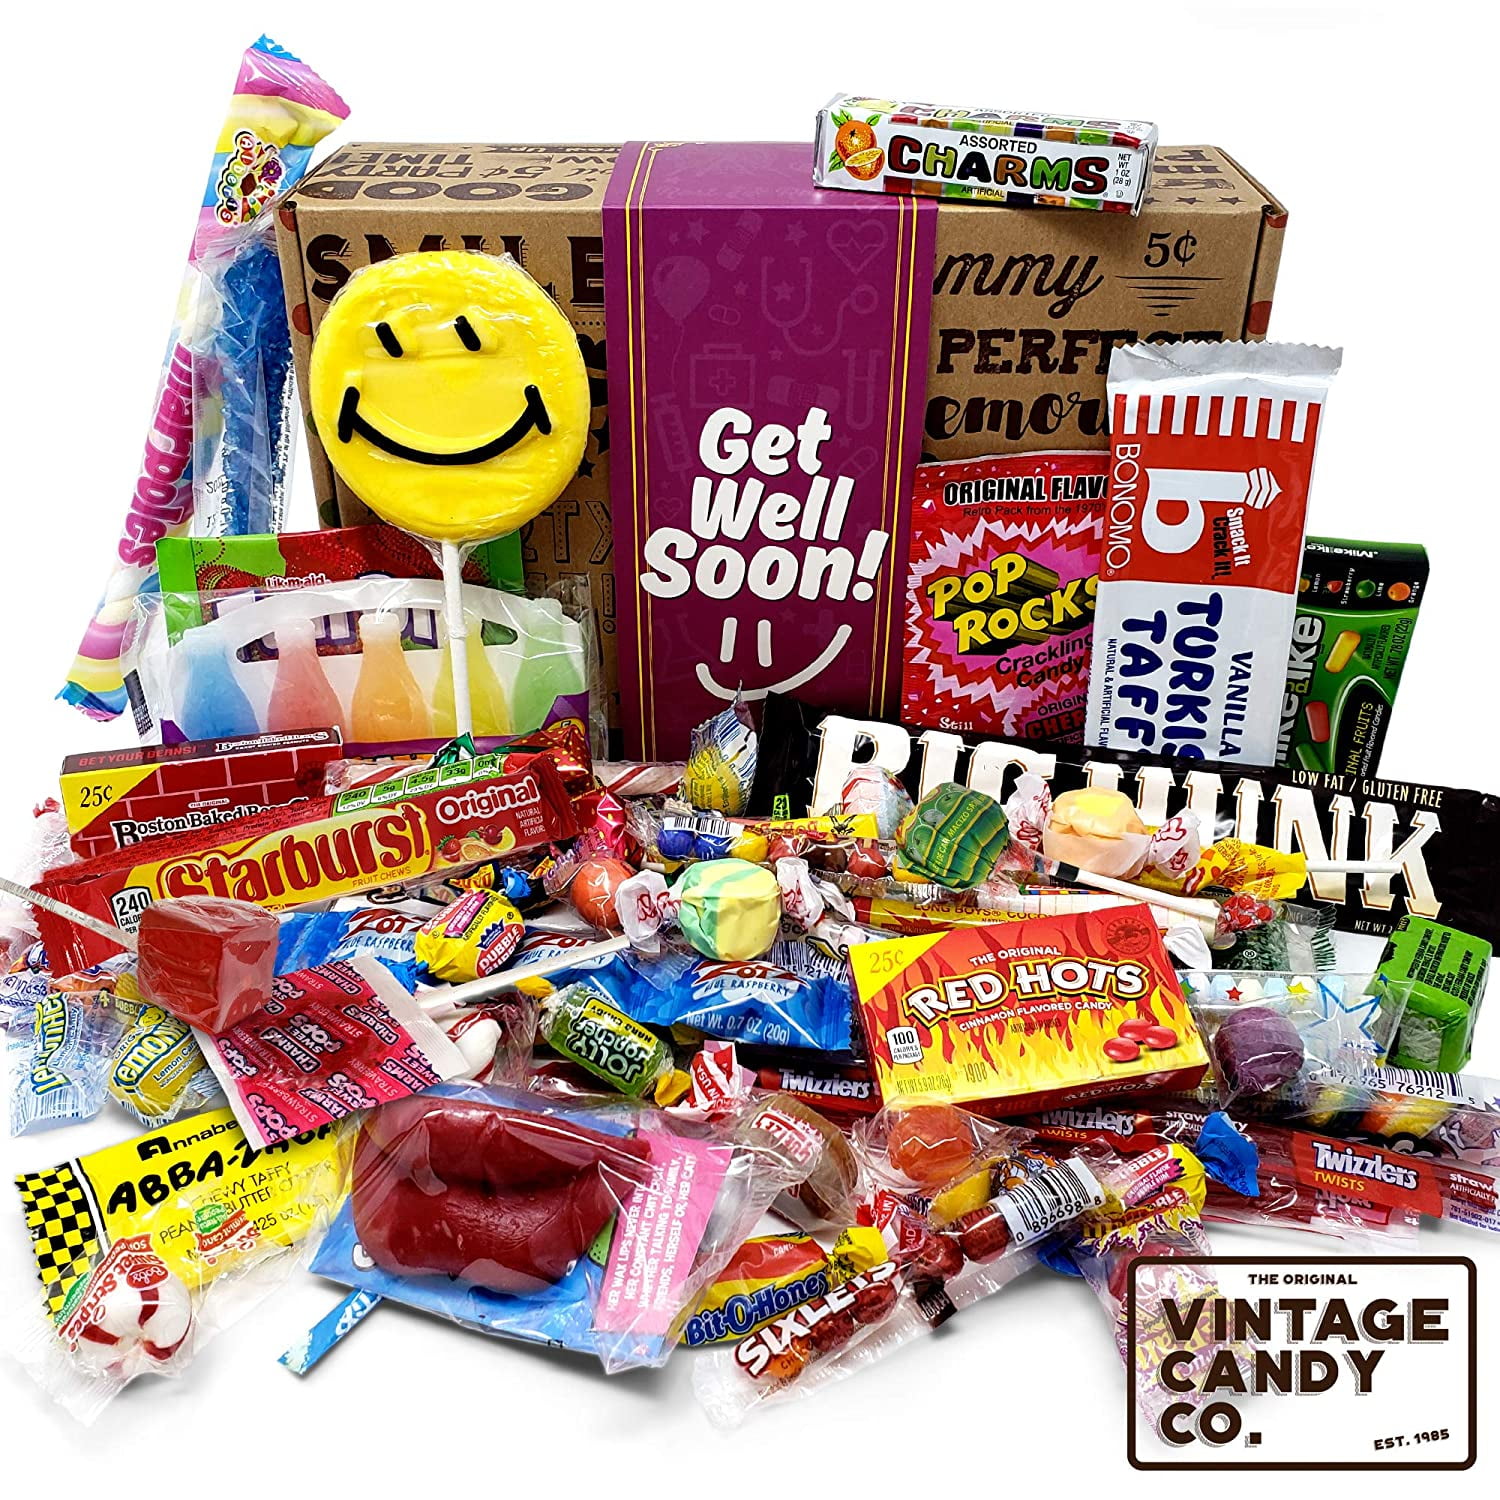 VINTAGE CANDY CONGRATULATIONS CARE PACKAGE - Nostalgia Candies Basket  CONGRATS GIFT BOX - Fun Pride Gift For Boy or Girl - PERFECT For Adults,  College Students, Friend, Teens, Man or Woman 